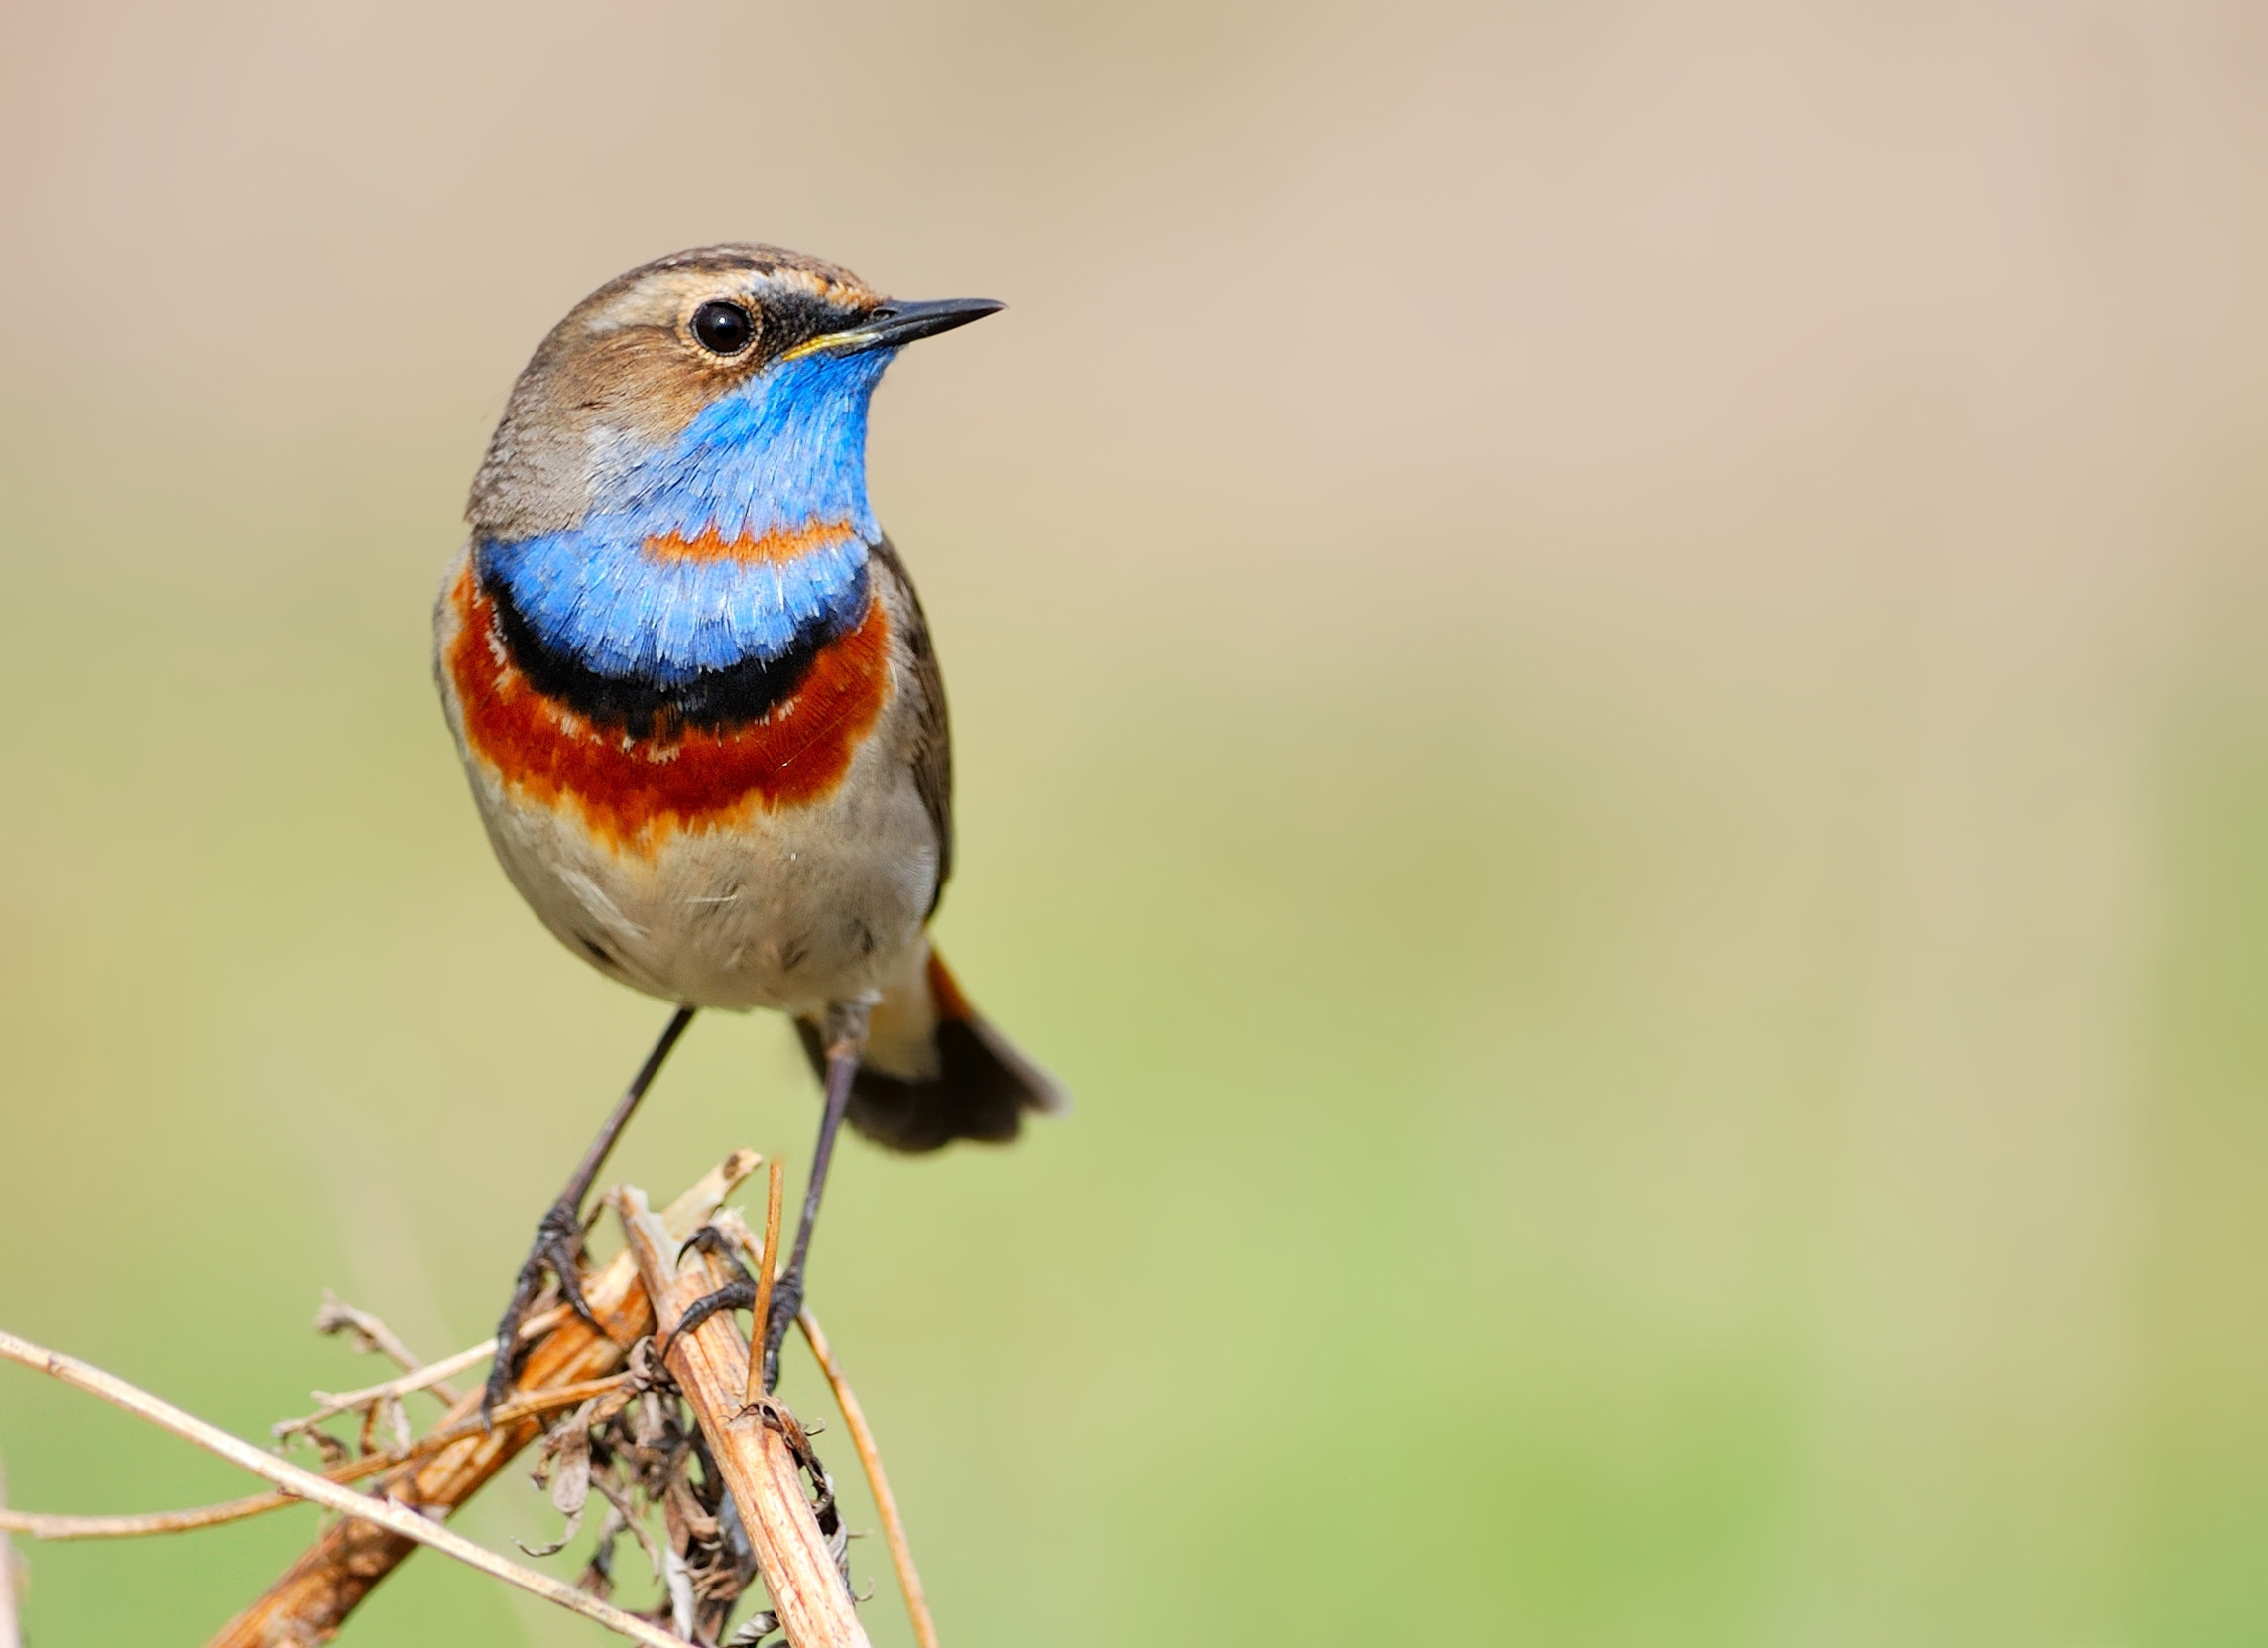 Bluethroat perched on a collection of branches.